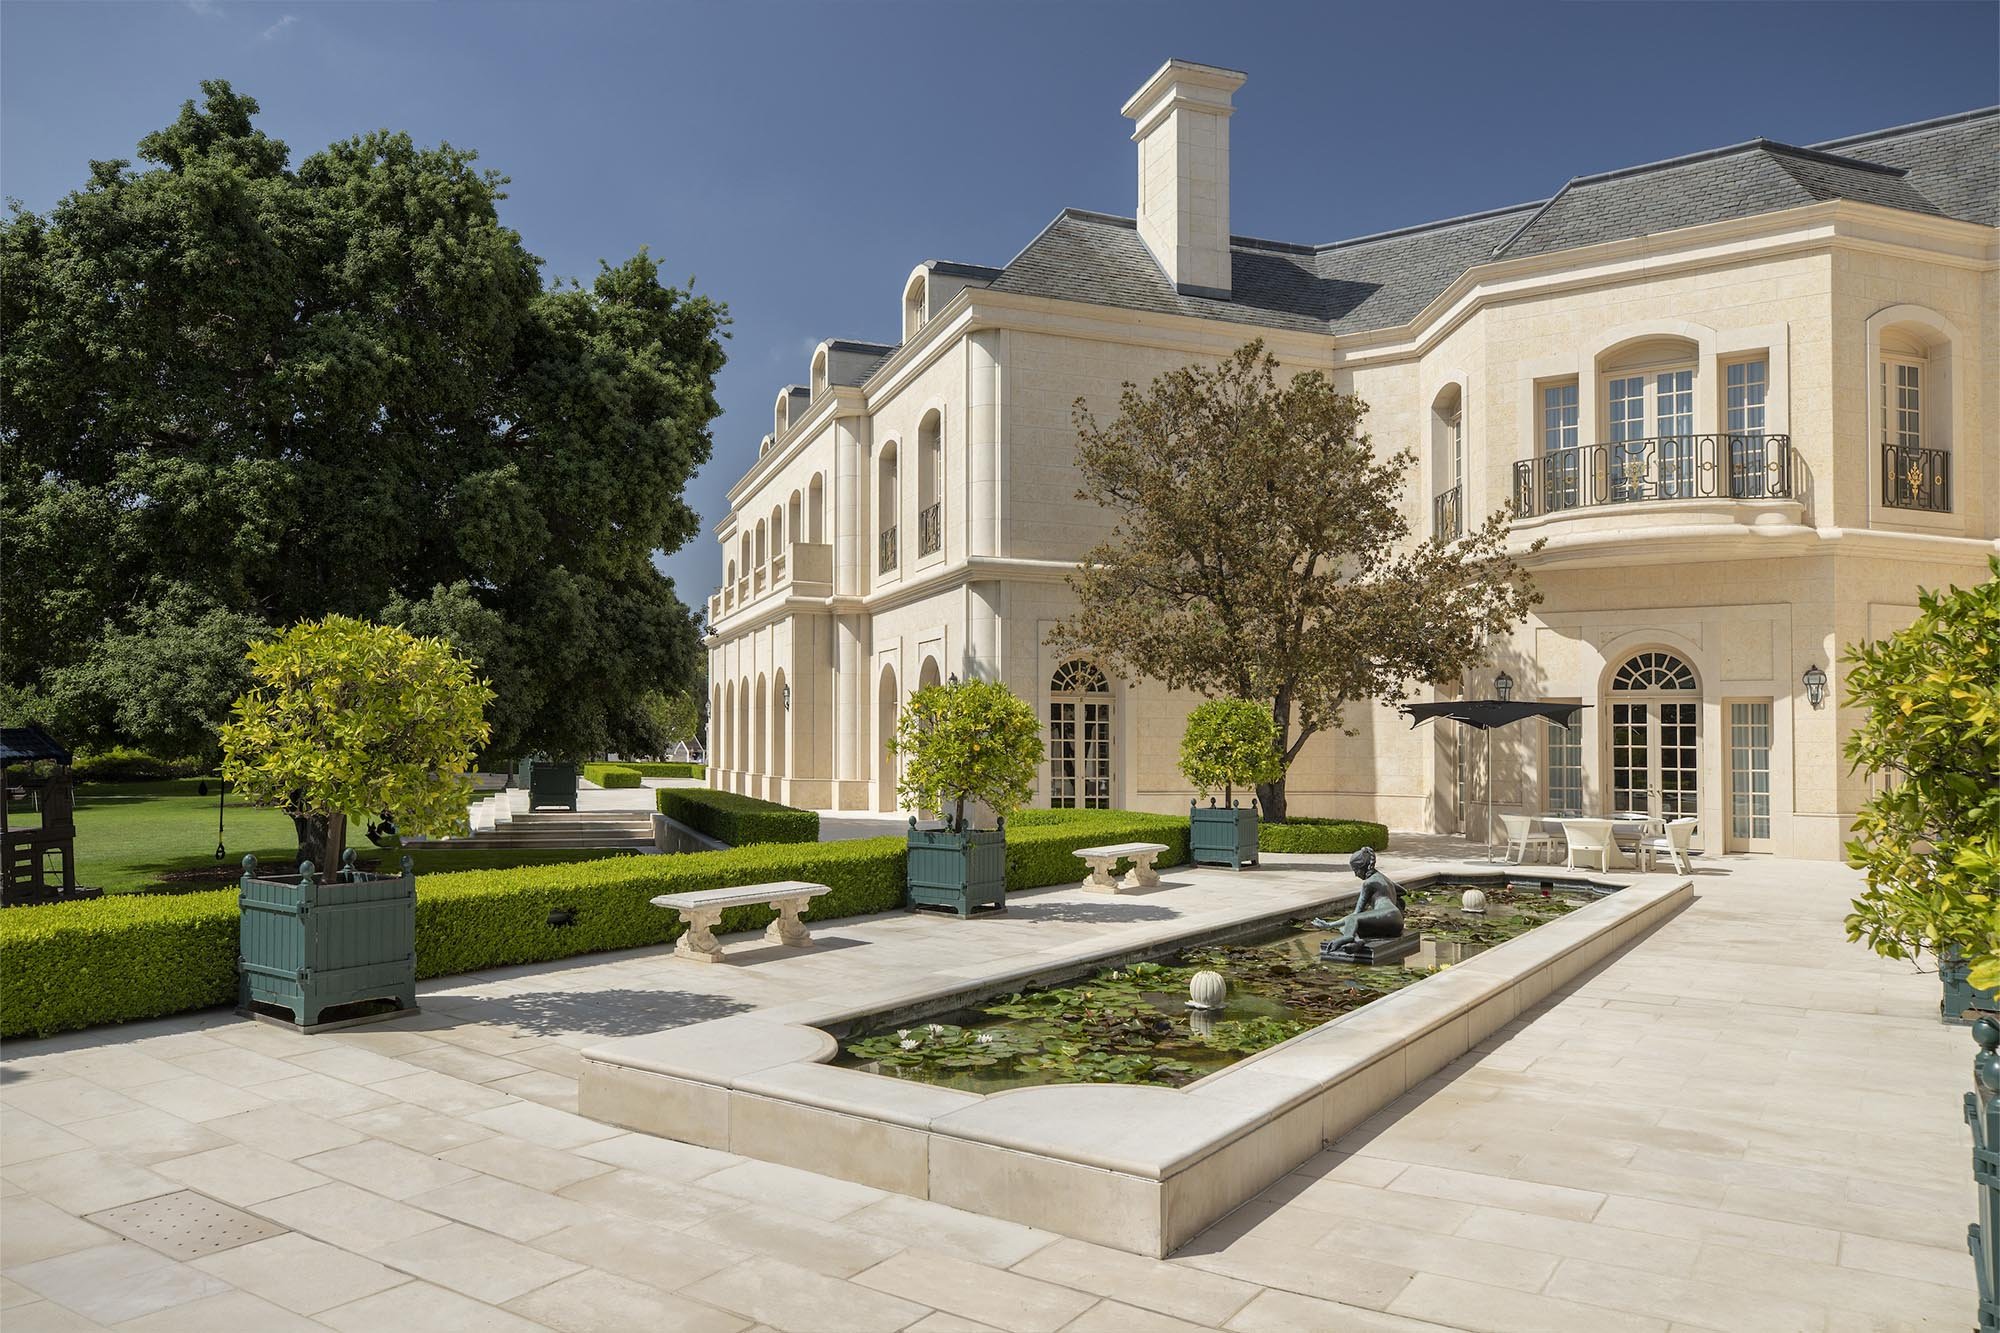 Francis York The 'Spelling Manor' is Back on the Market for $165M 6.jpg